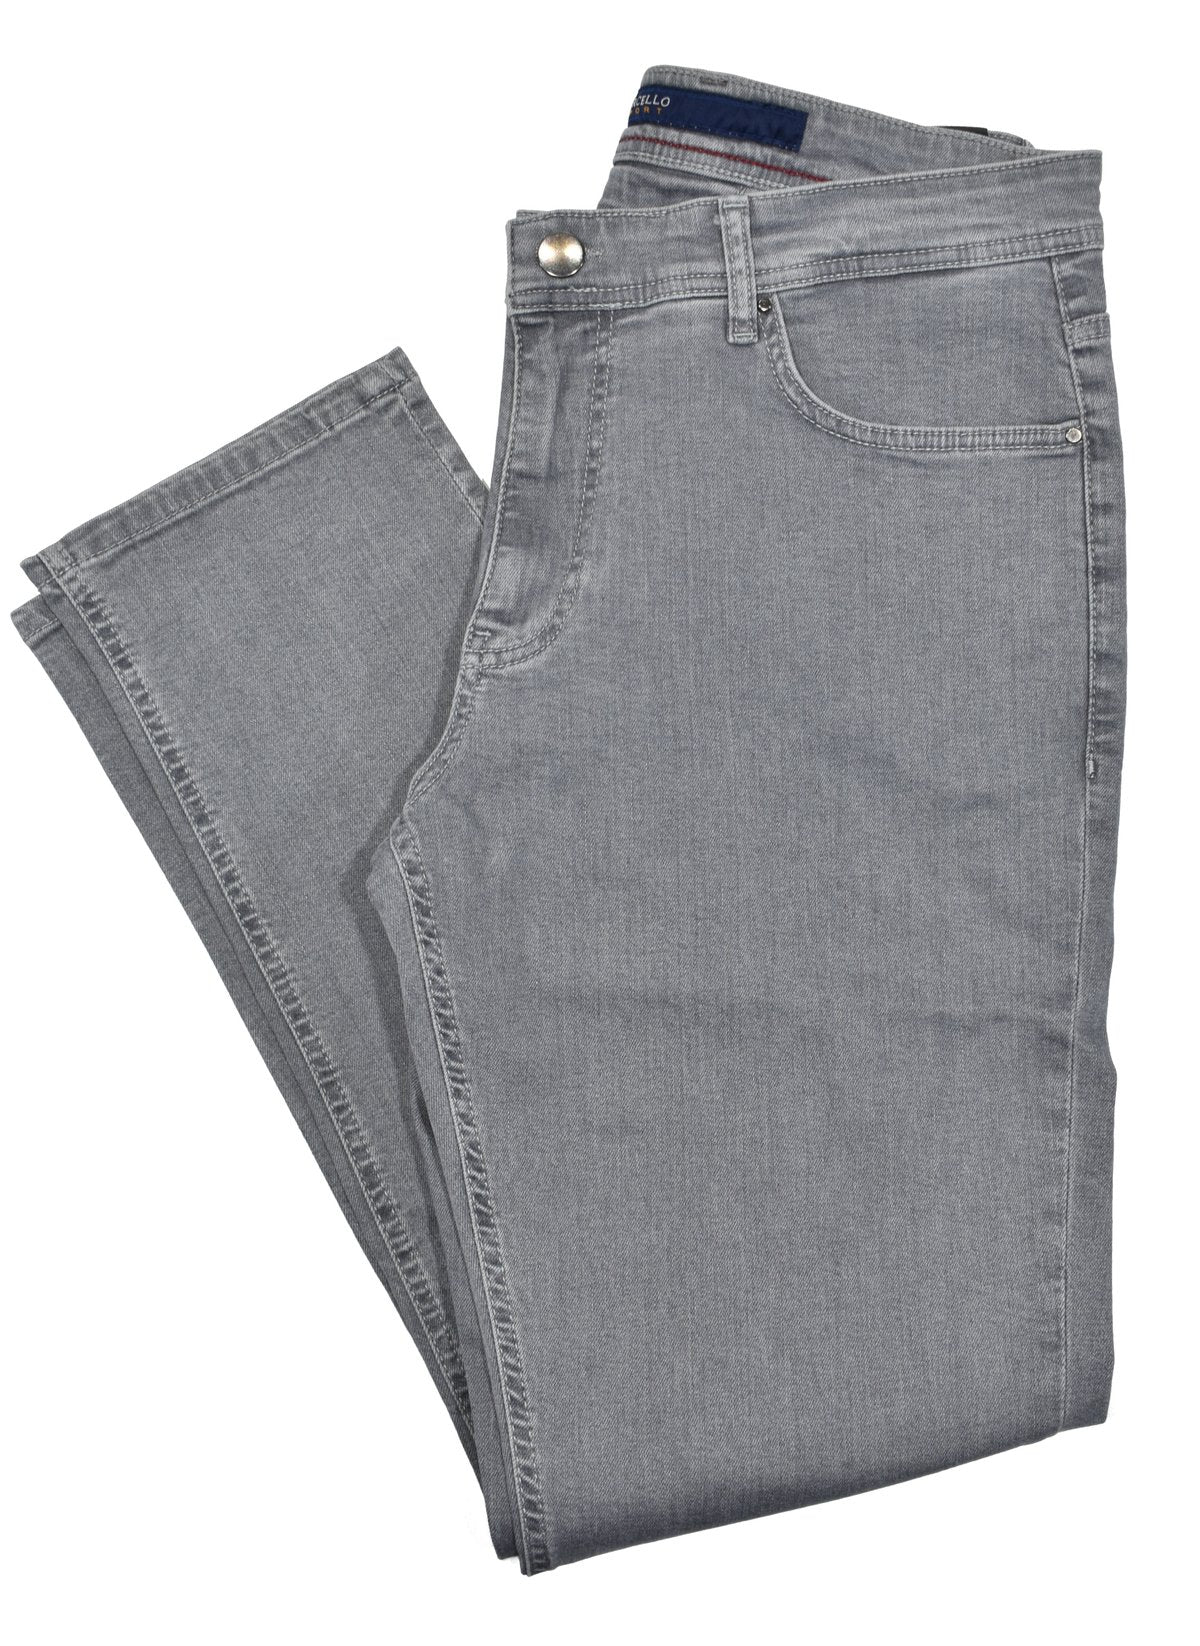 Upgrade your wardrobe with our new LP20 Grey jeans from Marcello. These lightweight washed denim jeans provide optimal comfort and support in all the right places for a perfect fit. With a slimmed leg and stretch for natural movement, you'll always look and feel your best.  Marcello Sport Mens Grey Jeans